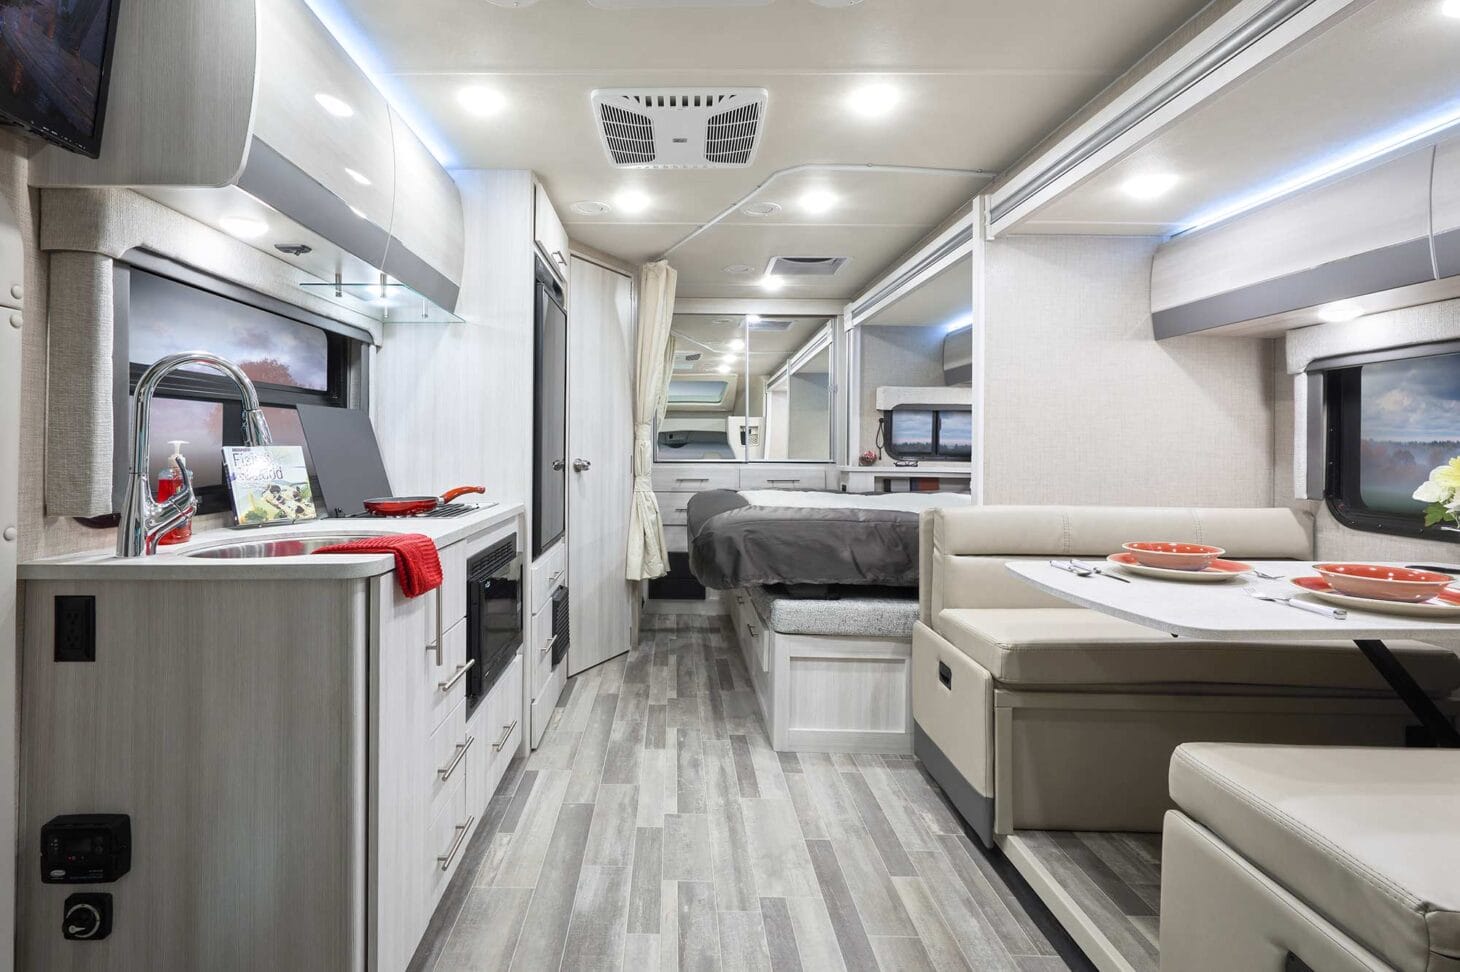 Interior of a large Class B+ RV with a kitchen, sleeping, and dining space